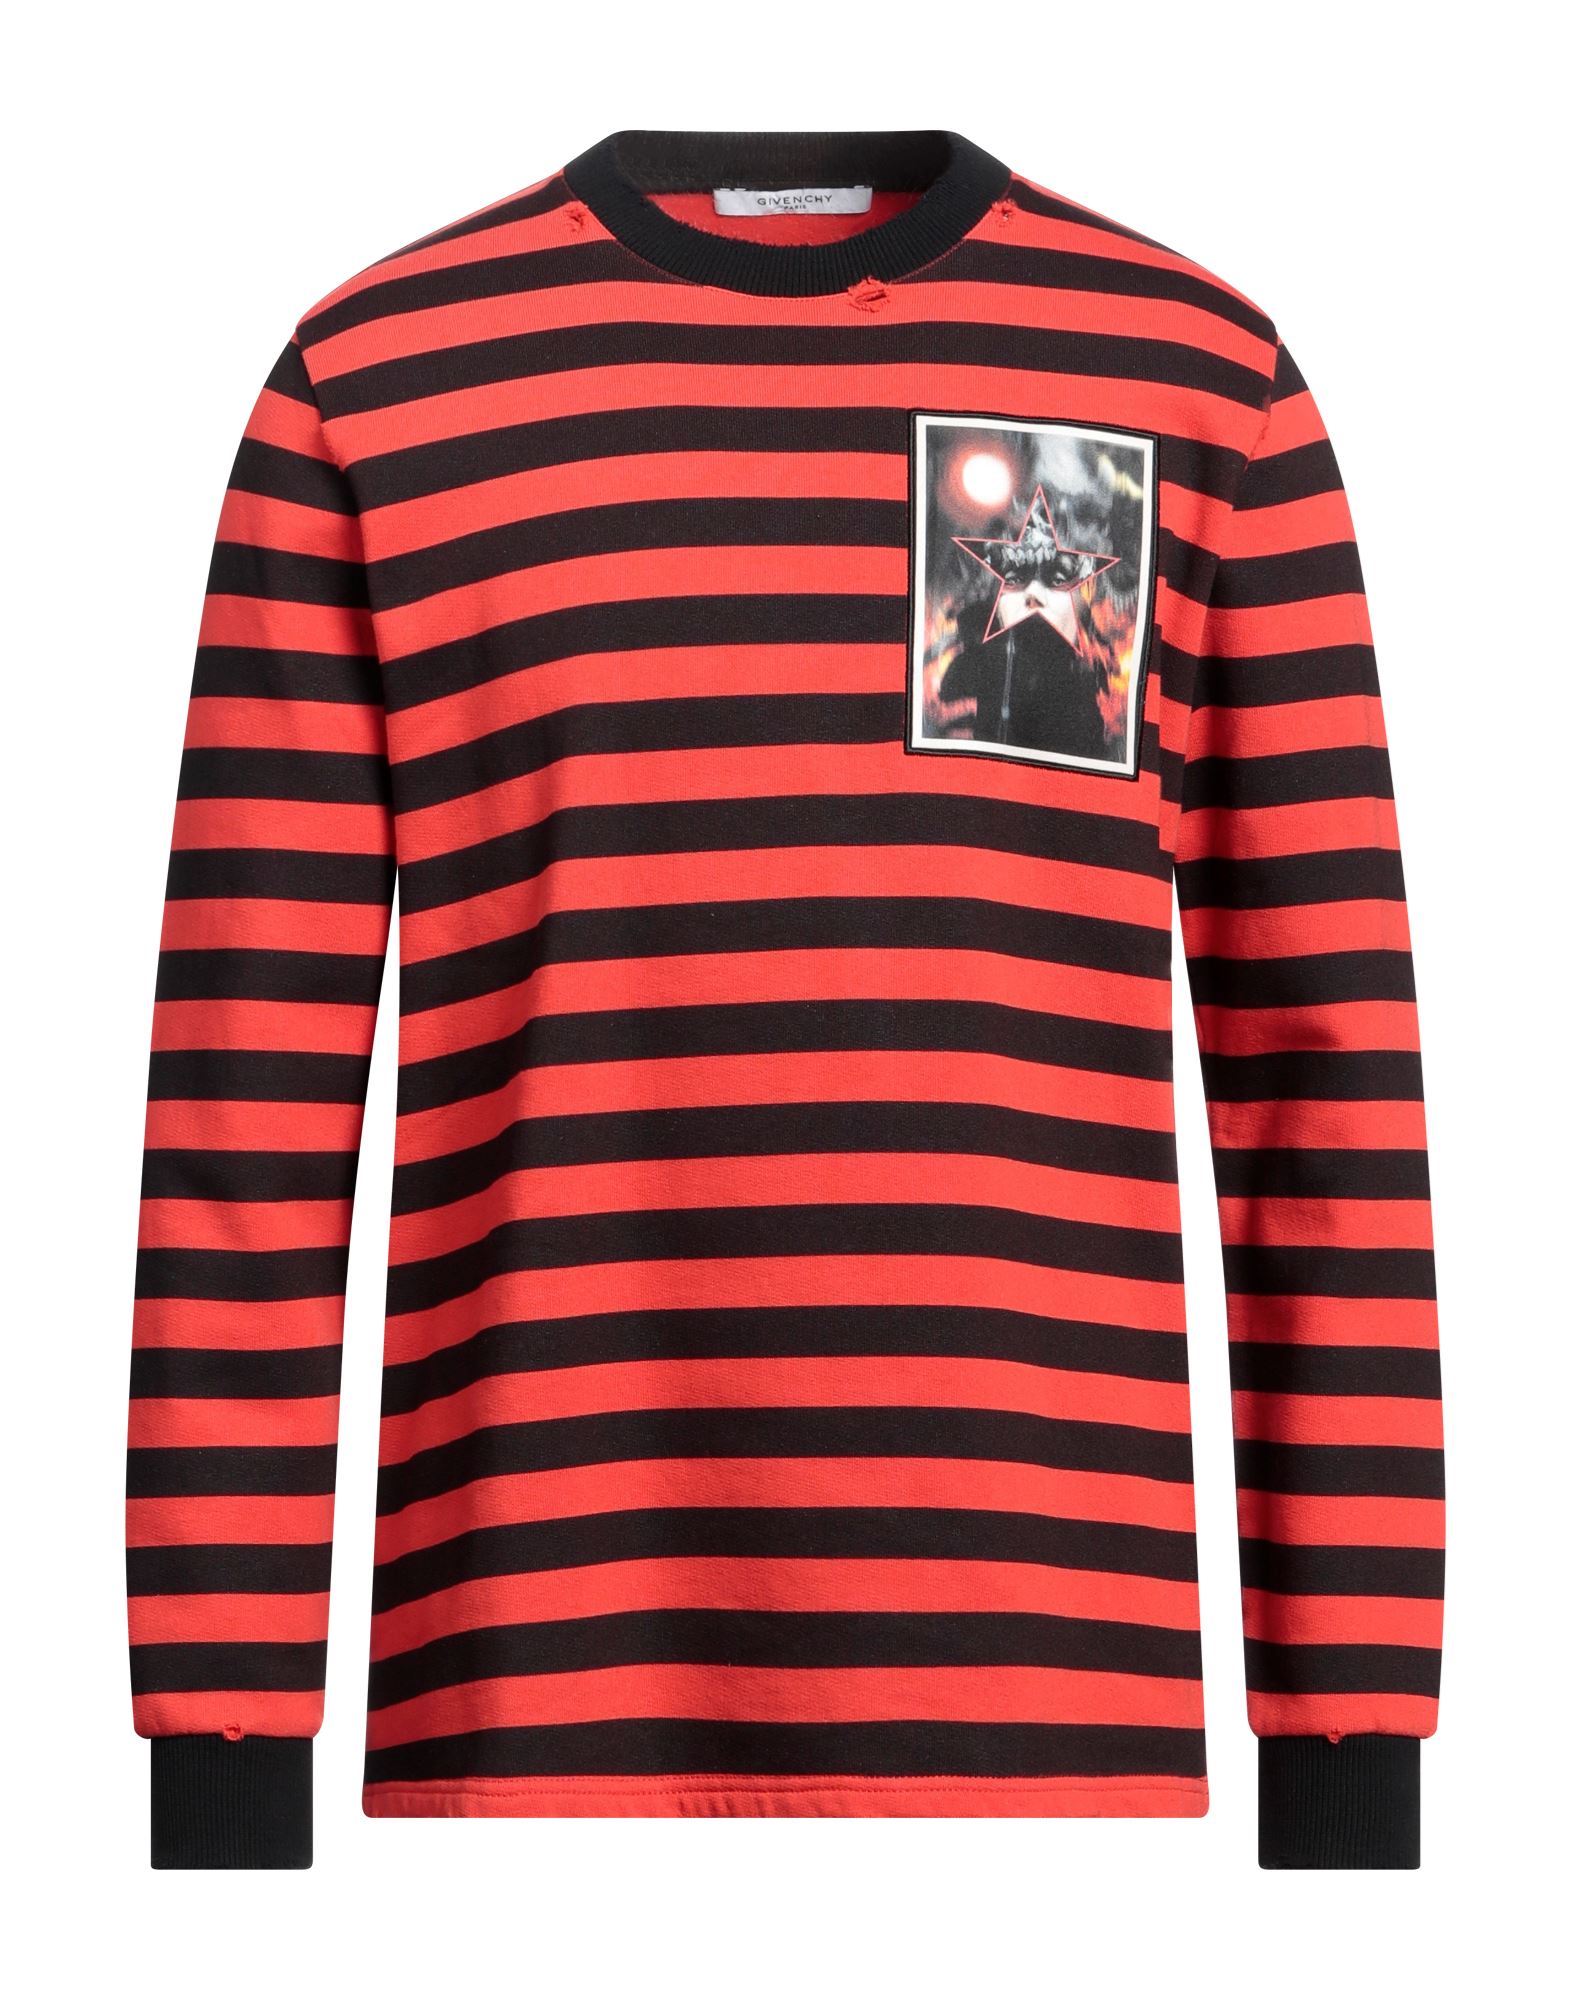 givenchy sweatshirt red